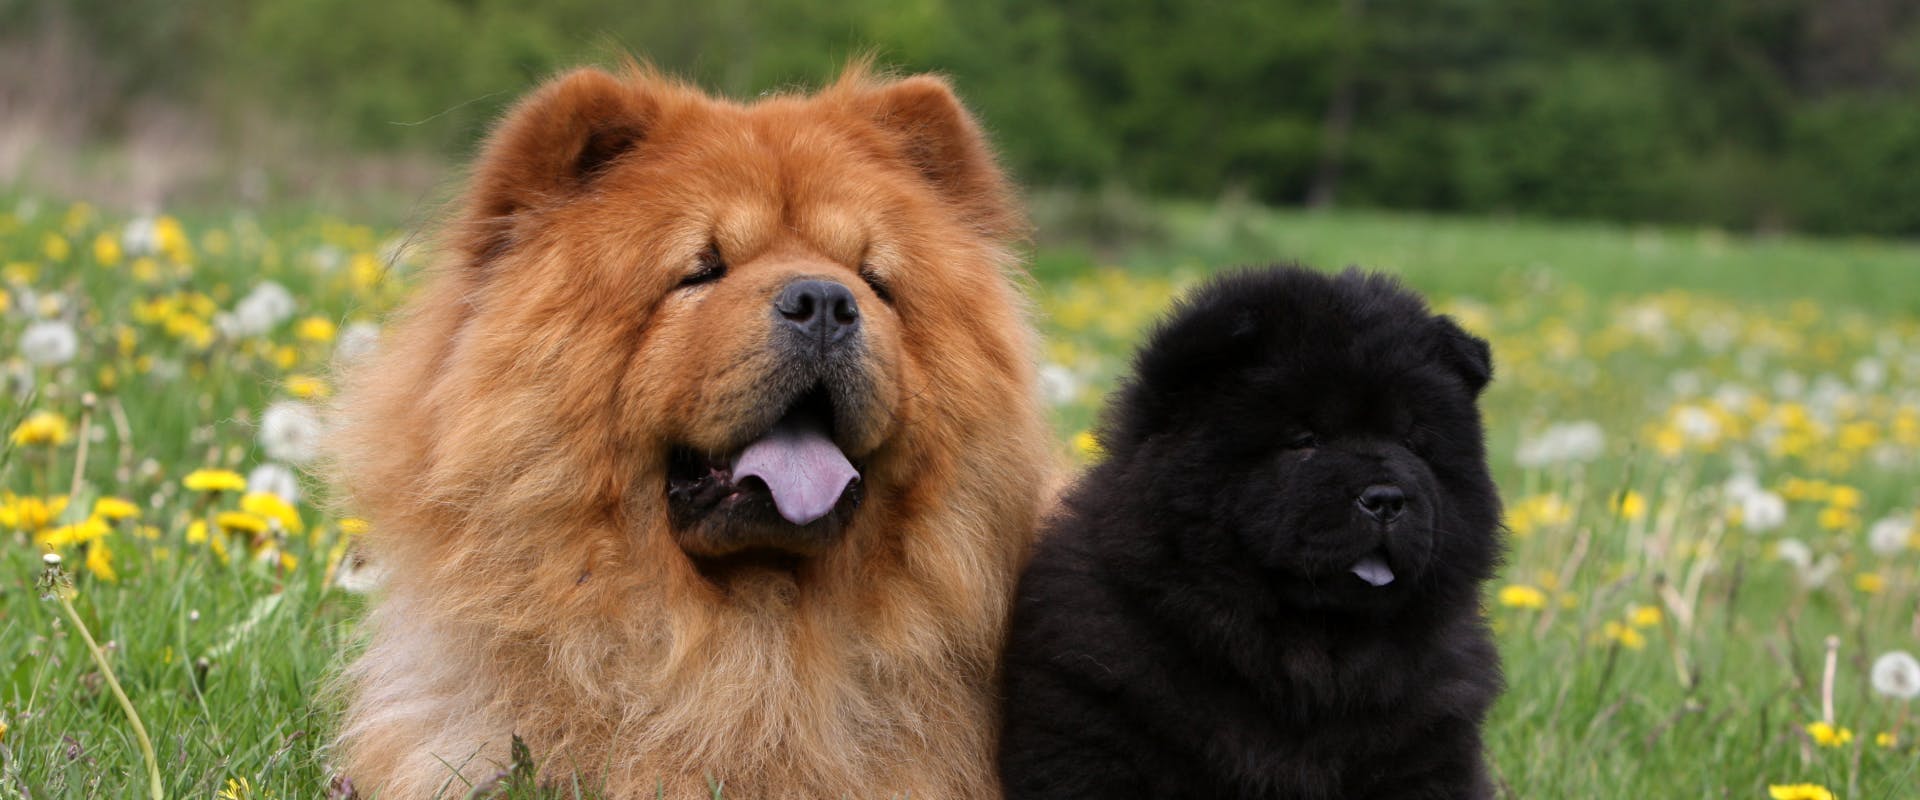 a chow chow dog sat next to a black chow chow puppy in a field of long grass and wild flowers